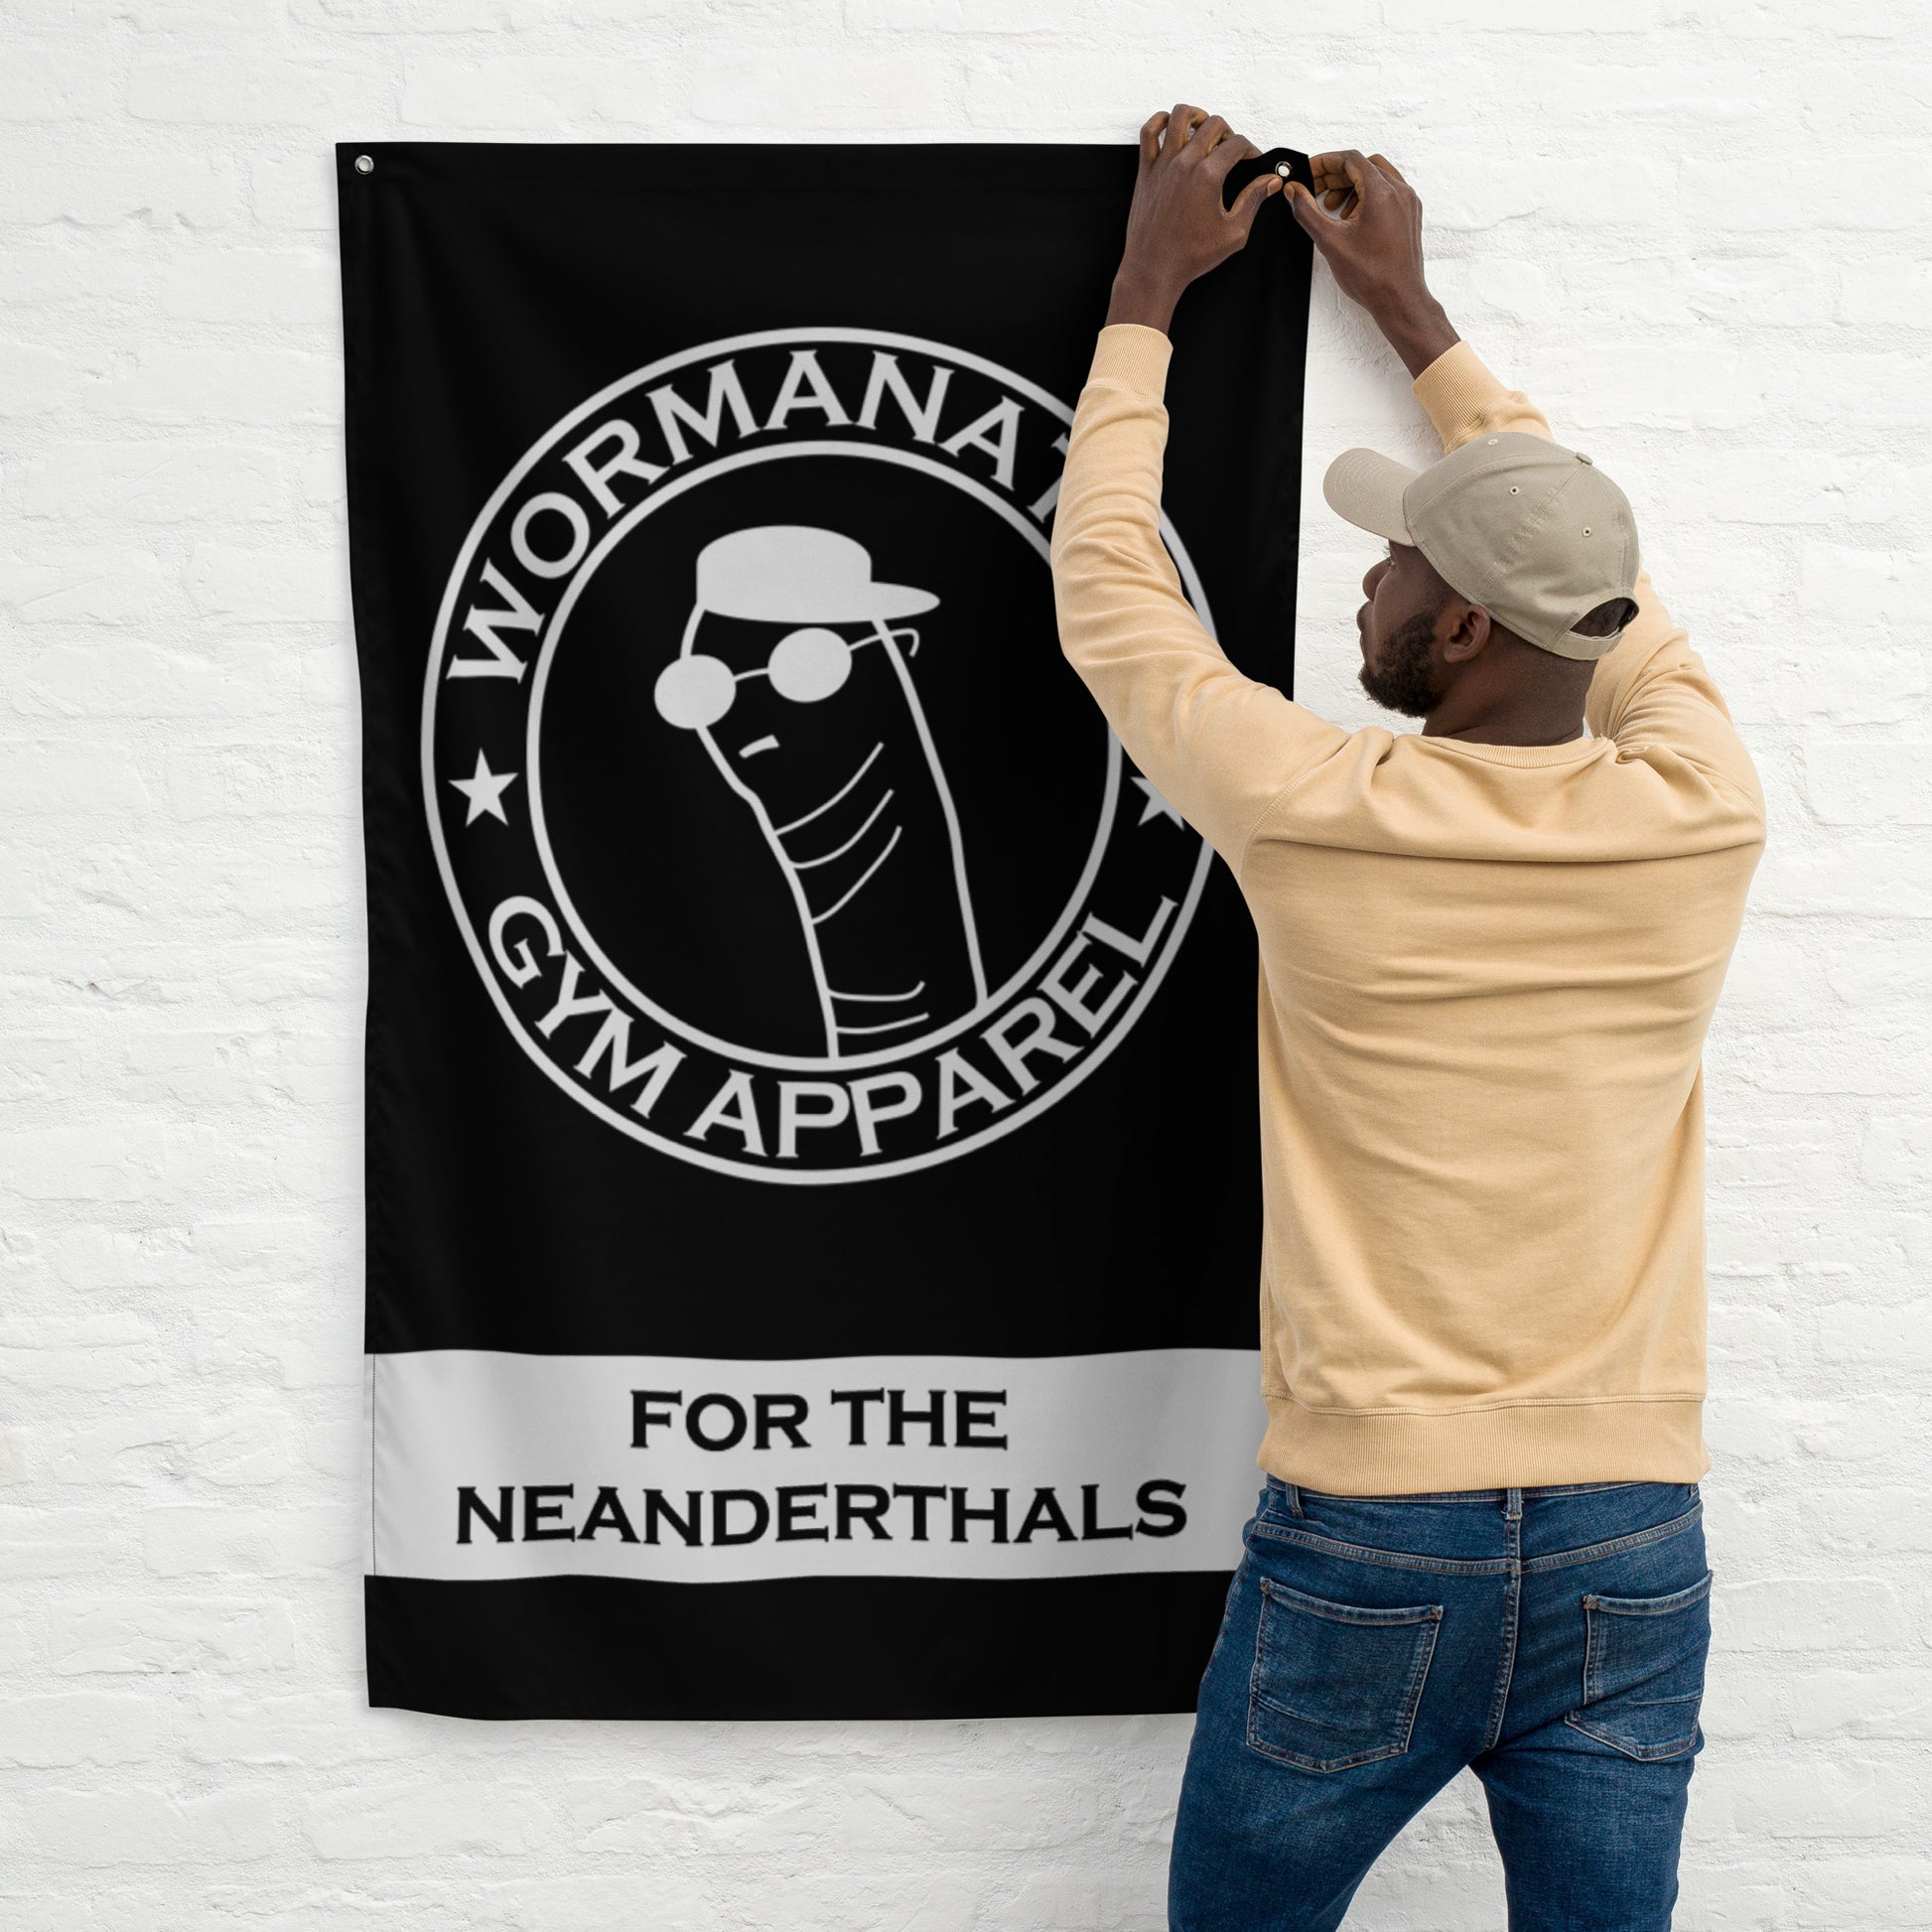 Man proudly hangs a Wormanator Gym Apparel Flag - For the Neanderthals